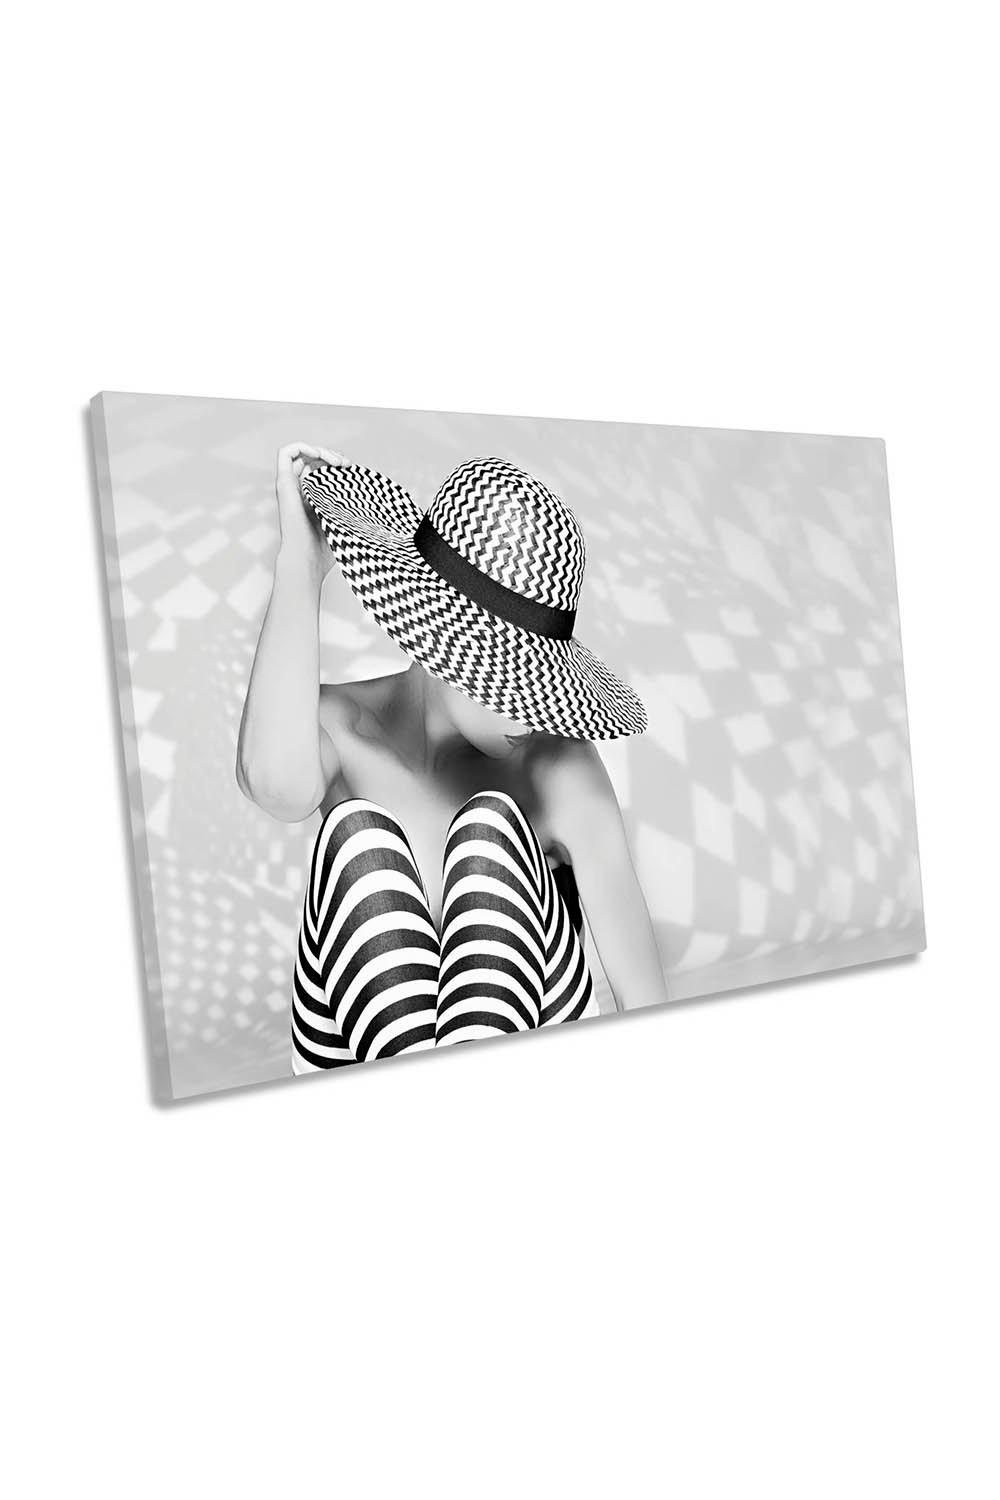 Zig the Zag Fashion Hat Model Canvas Wall Art Picture Print